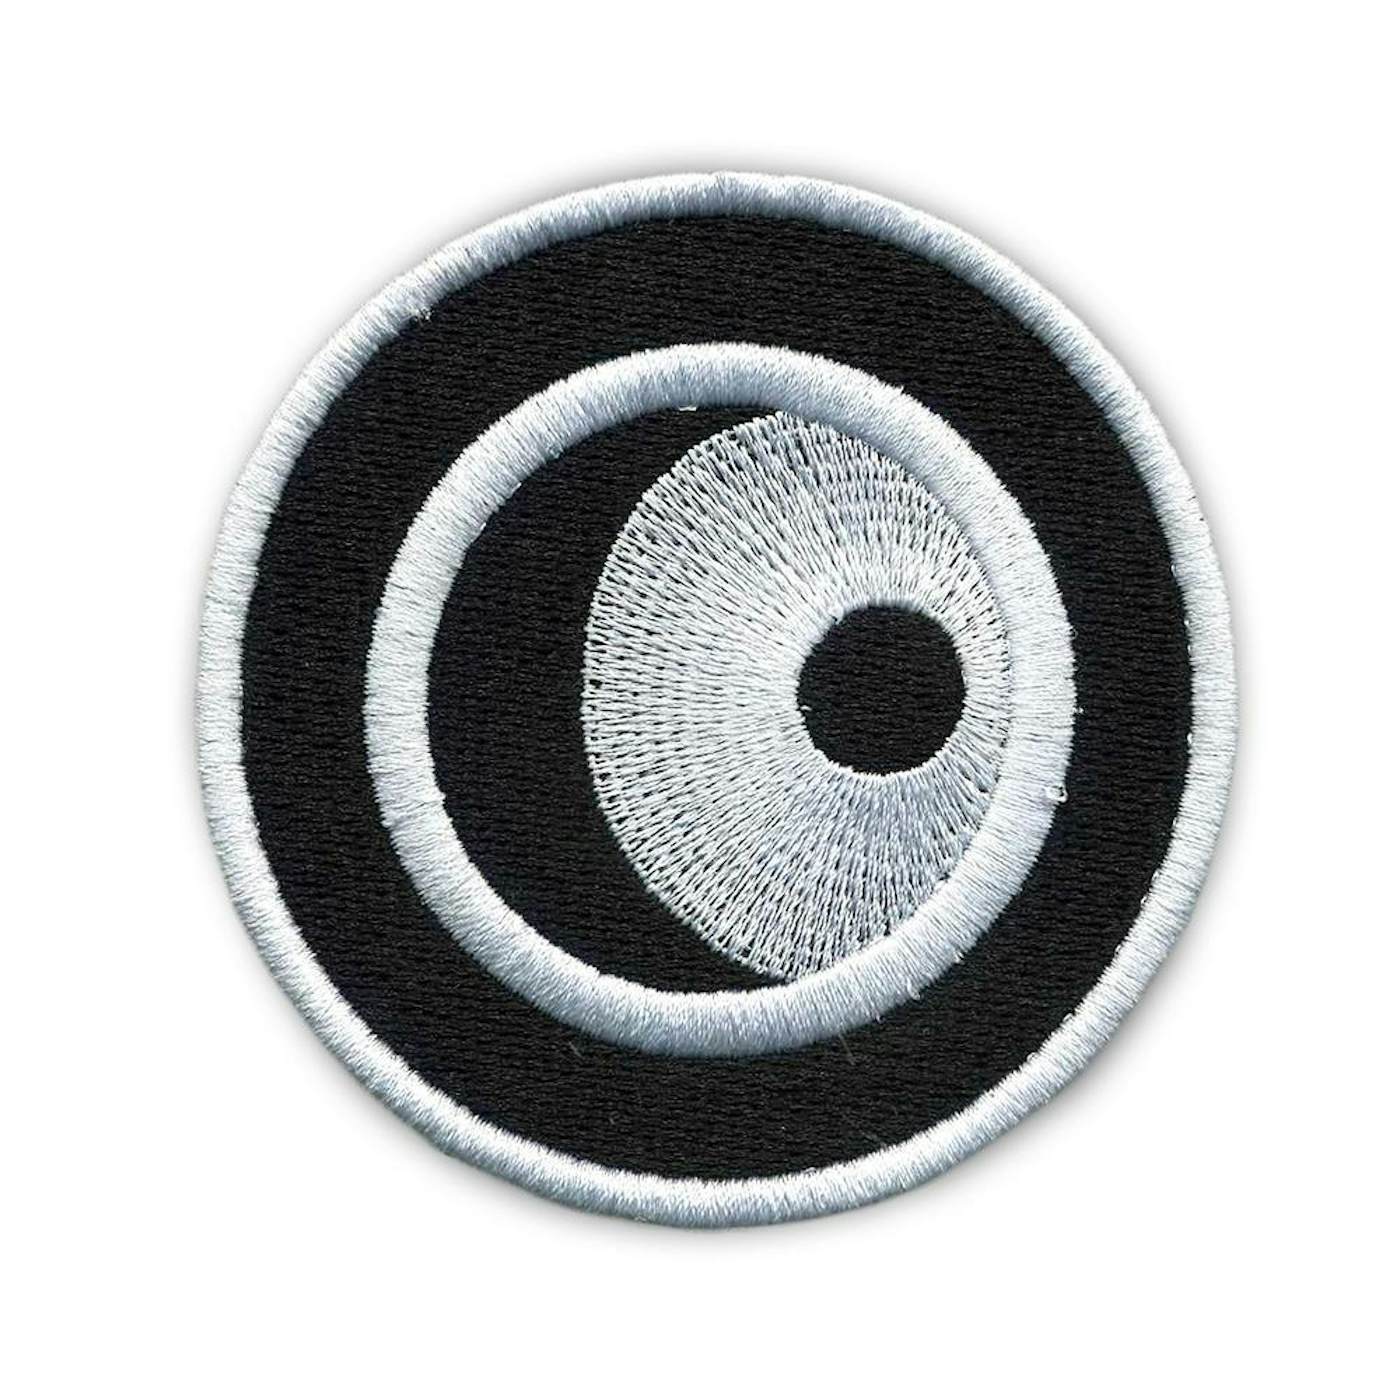 The Word Alive Moon Patch